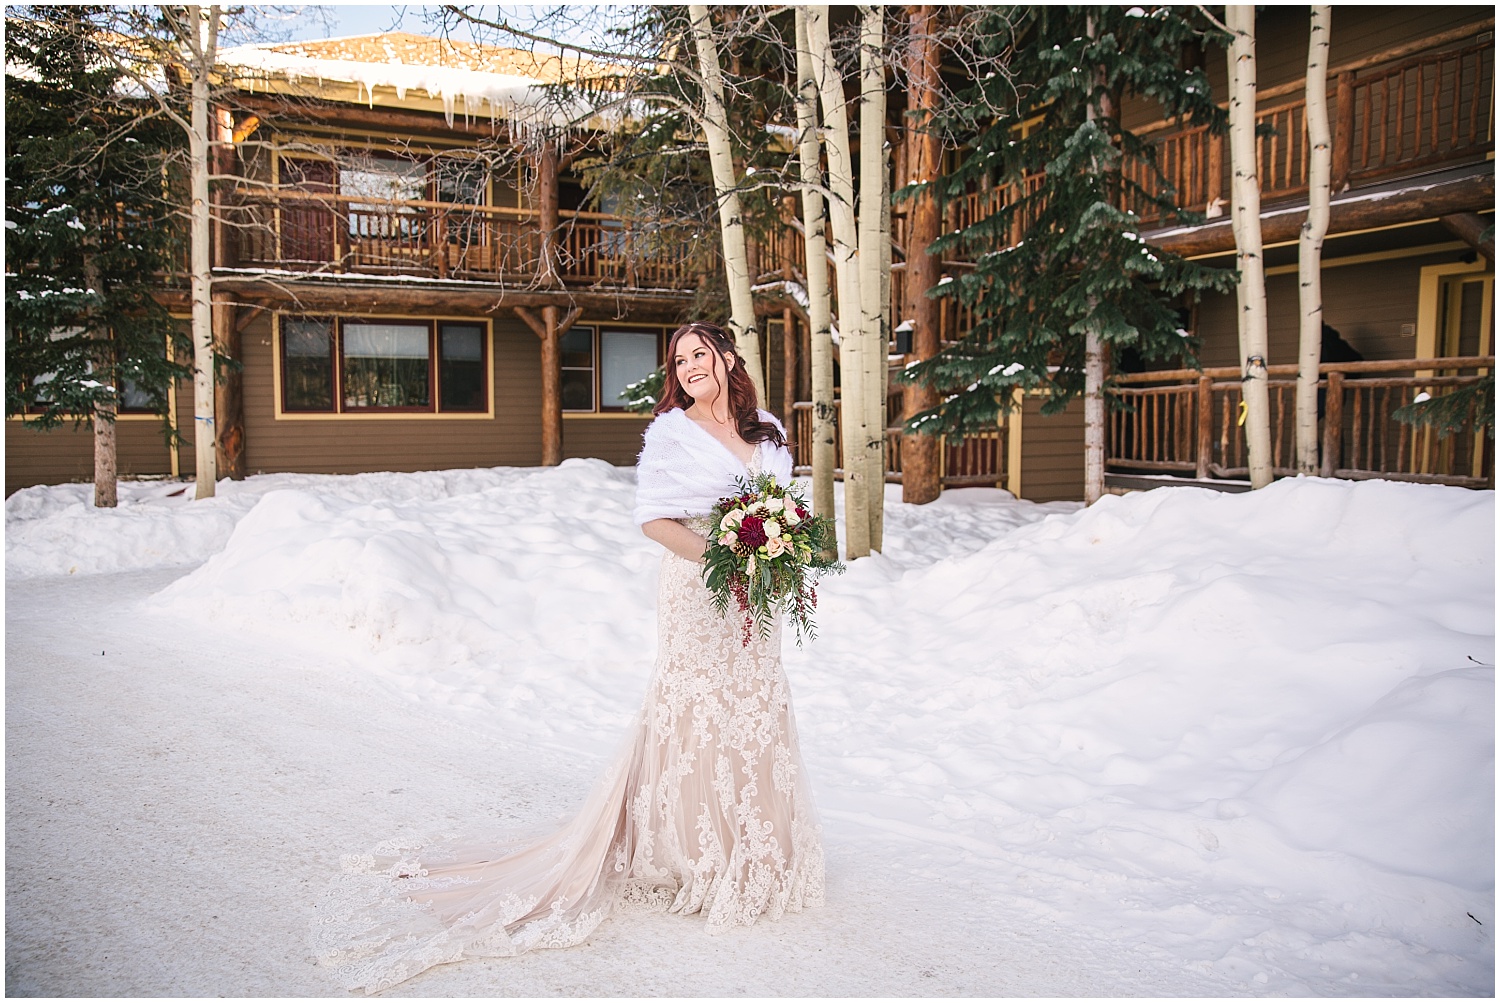 bridal portraits in the snow at The Lodge at Breckenridge winter wedding